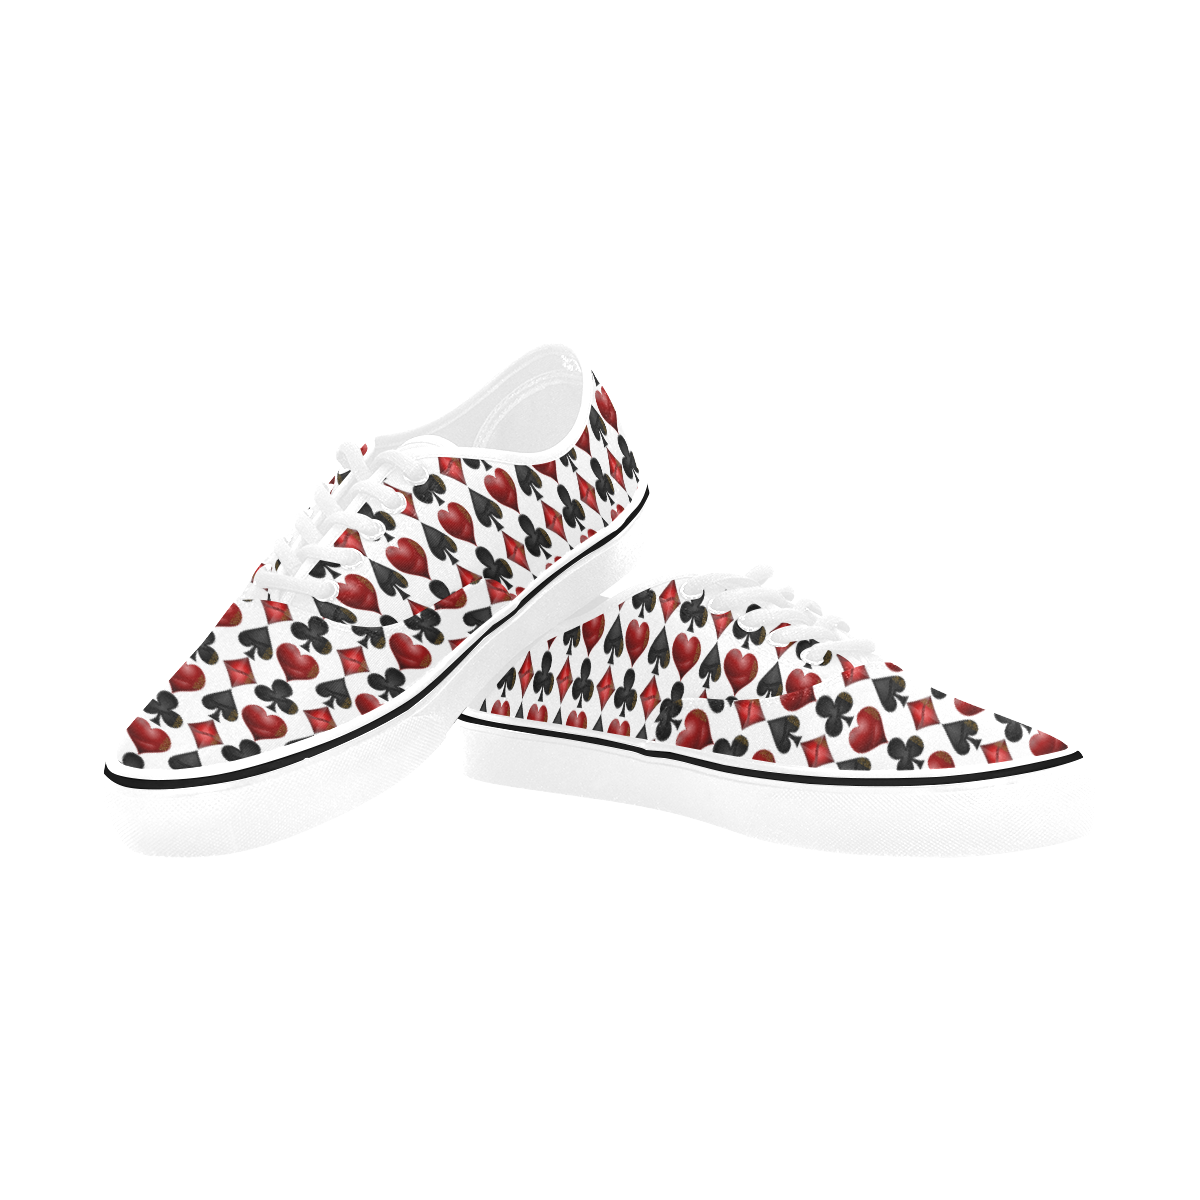 Las Vegas Black and Red Casino Poker Card Shapes Classic Men's Canvas Low Top Shoes/Large (Model E001-4)